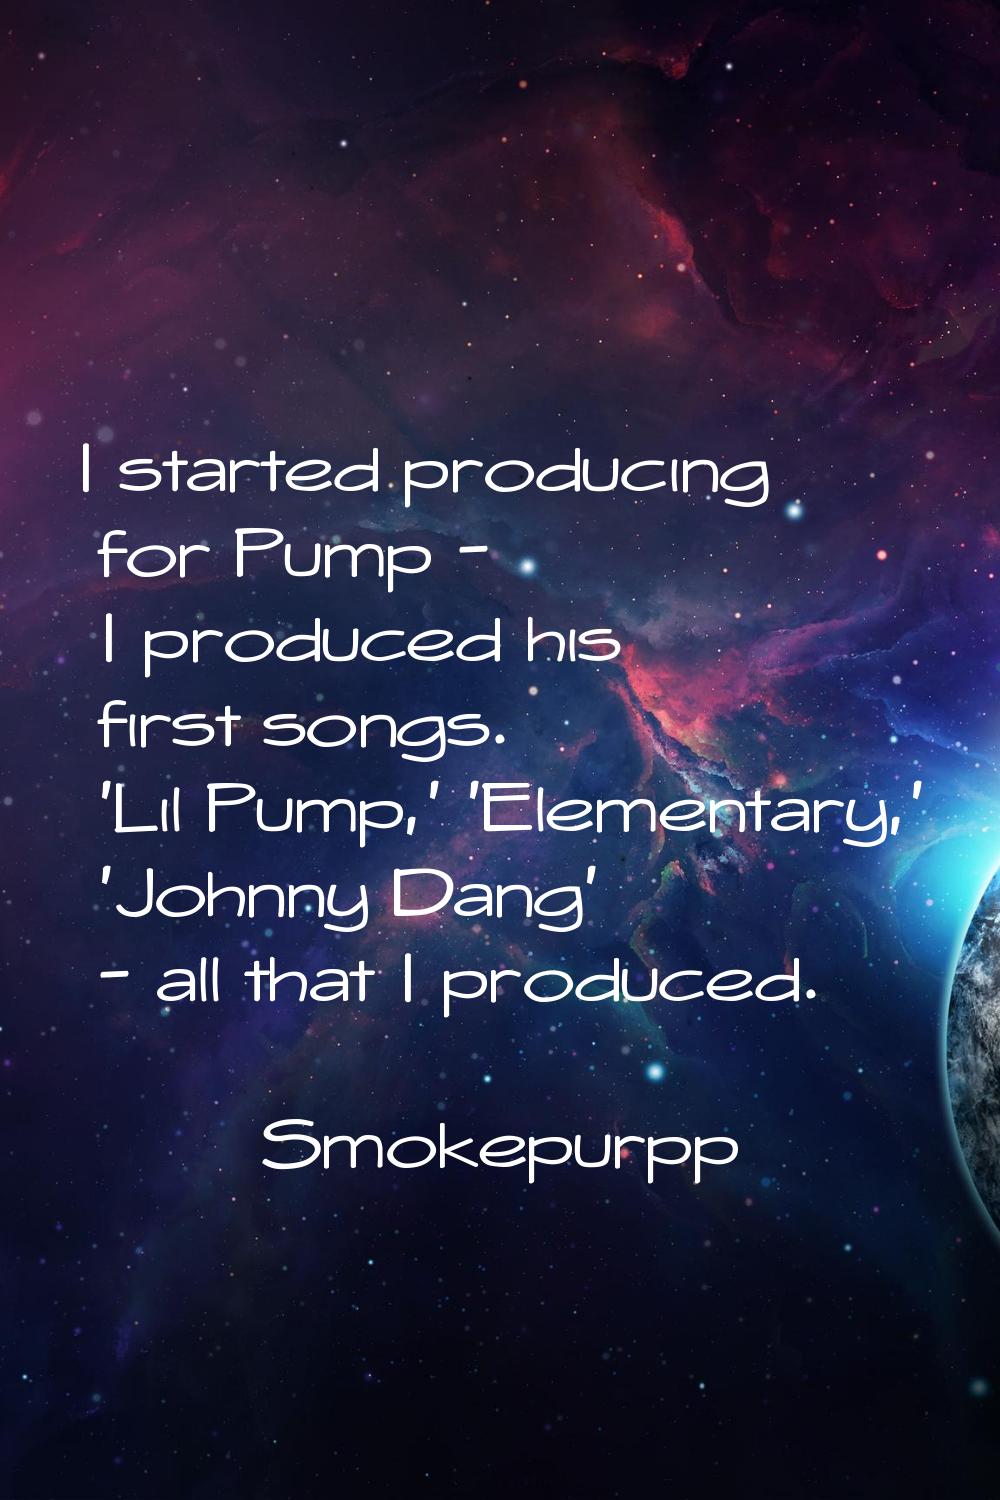 I started producing for Pump - I produced his first songs. 'Lil Pump,' 'Elementary,' 'Johnny Dang' 